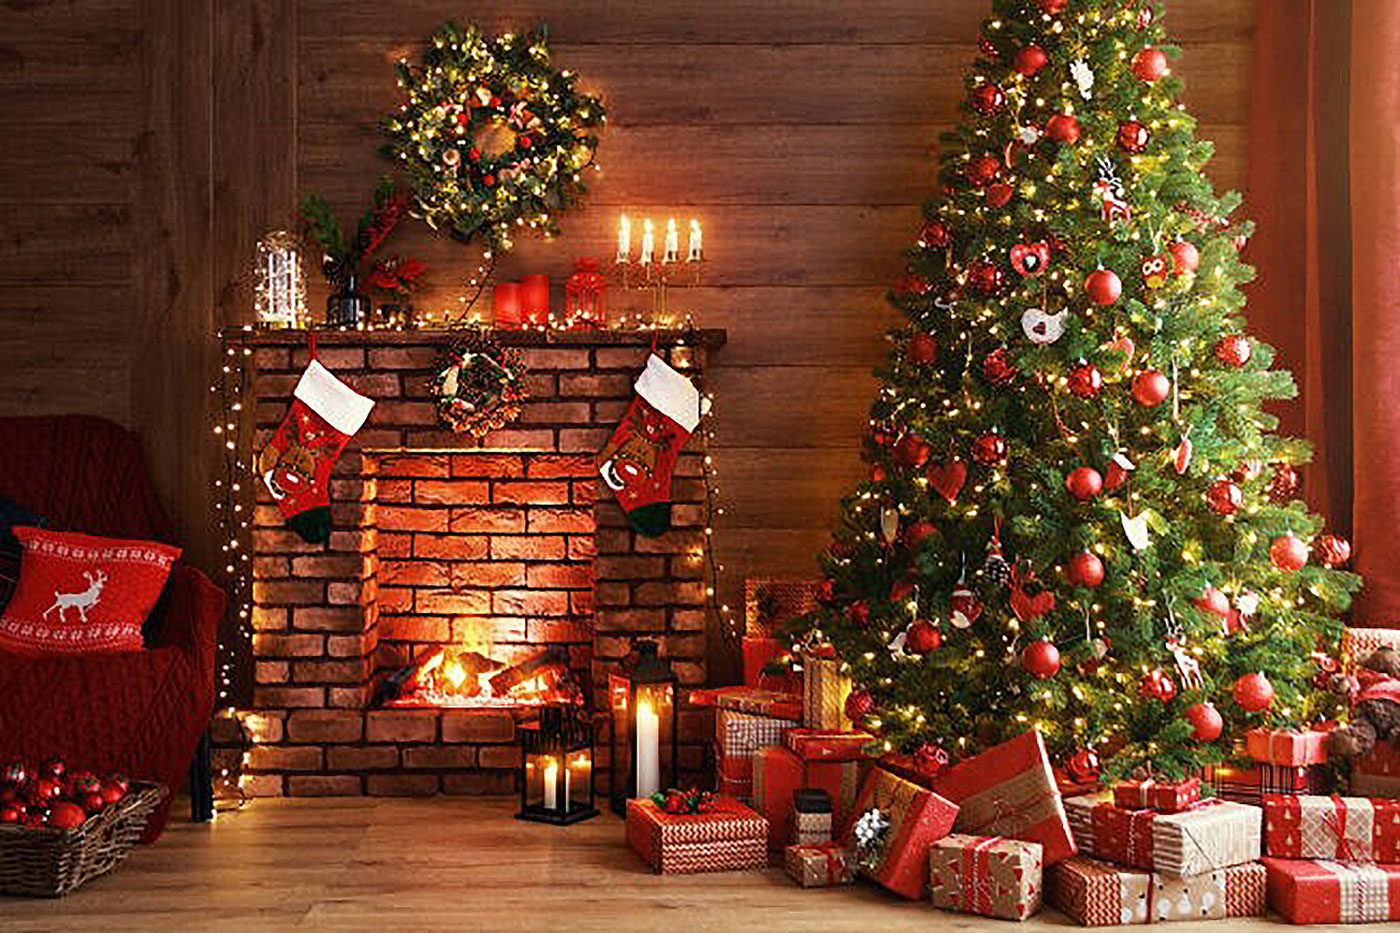 decorated evergreen tree next to fireplace in log house